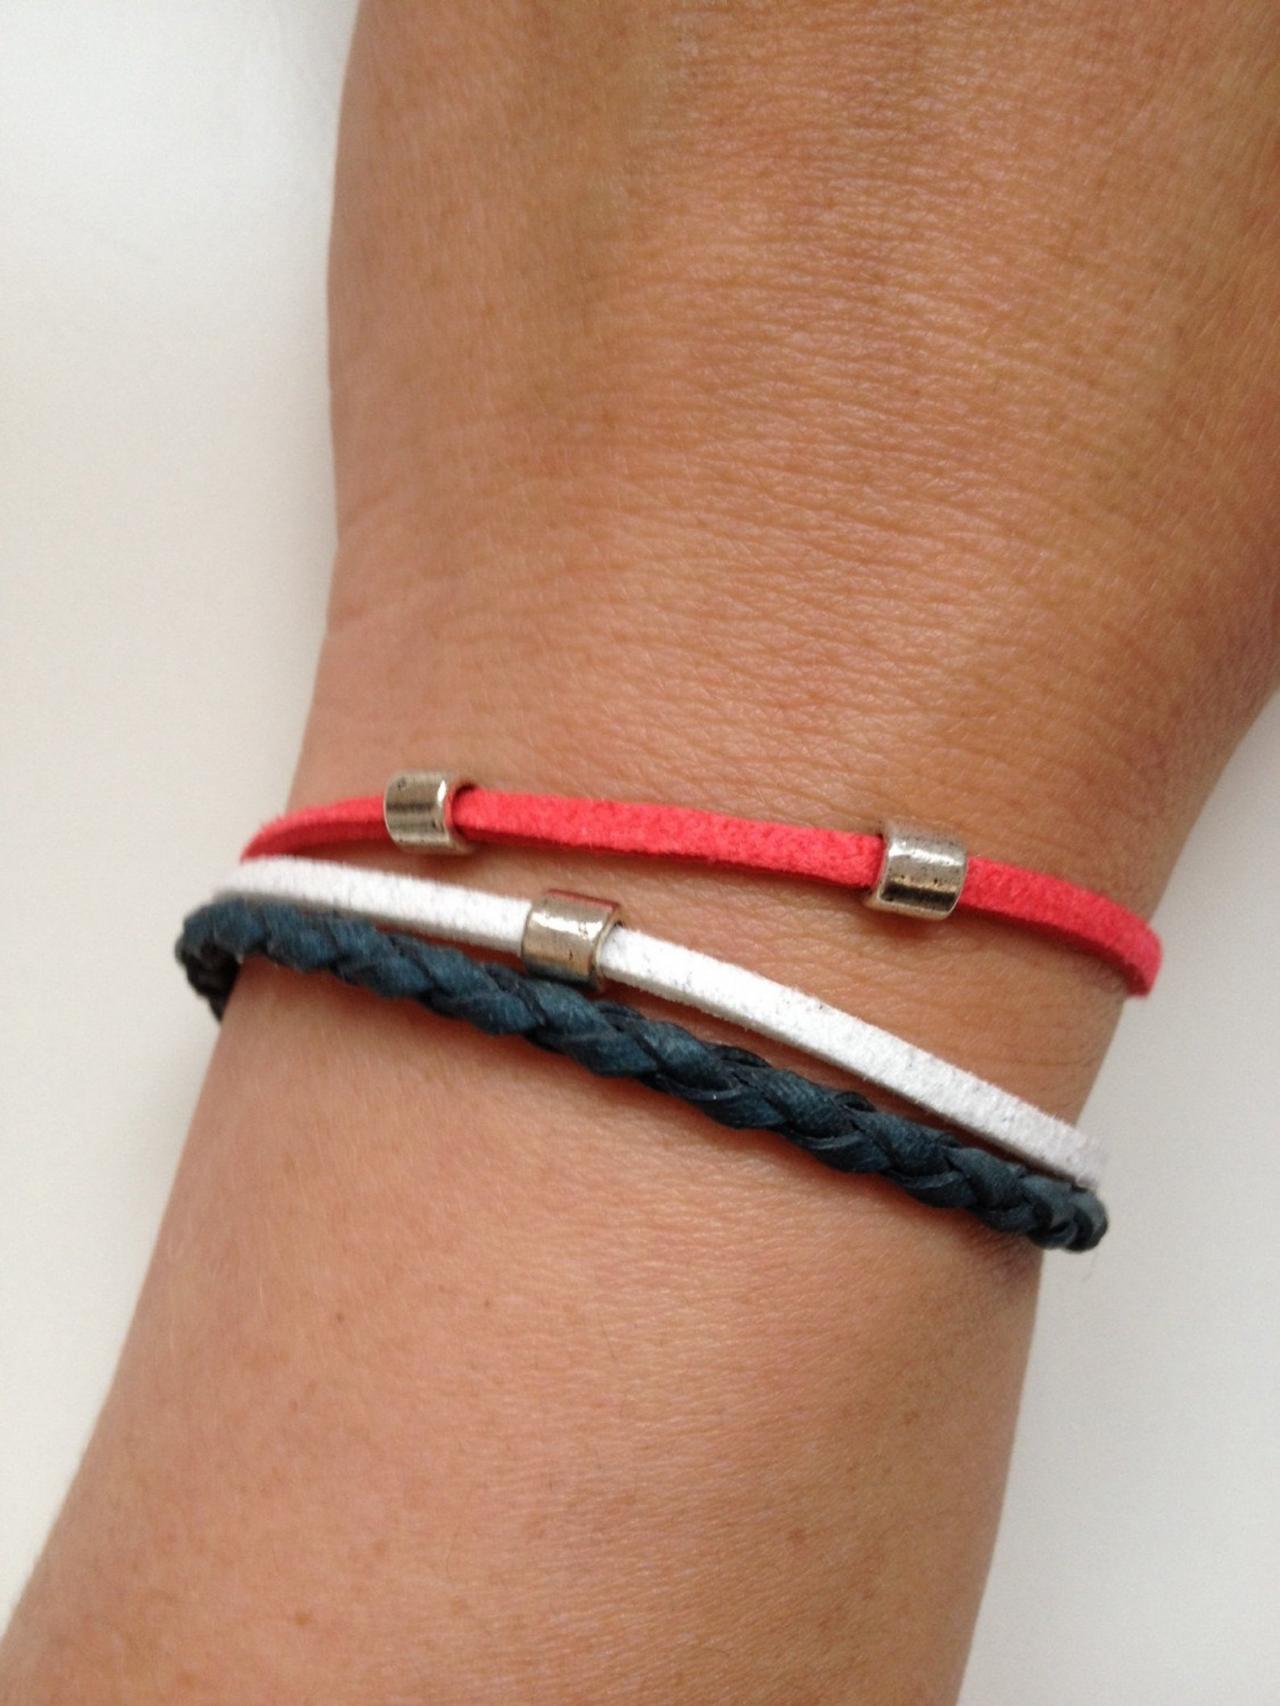 Leather Bracelet 129 - York Giants Cuff Ring Bracelet Blue Navy Red White Leather Braid Gift Adjustable Current Womenswear Football